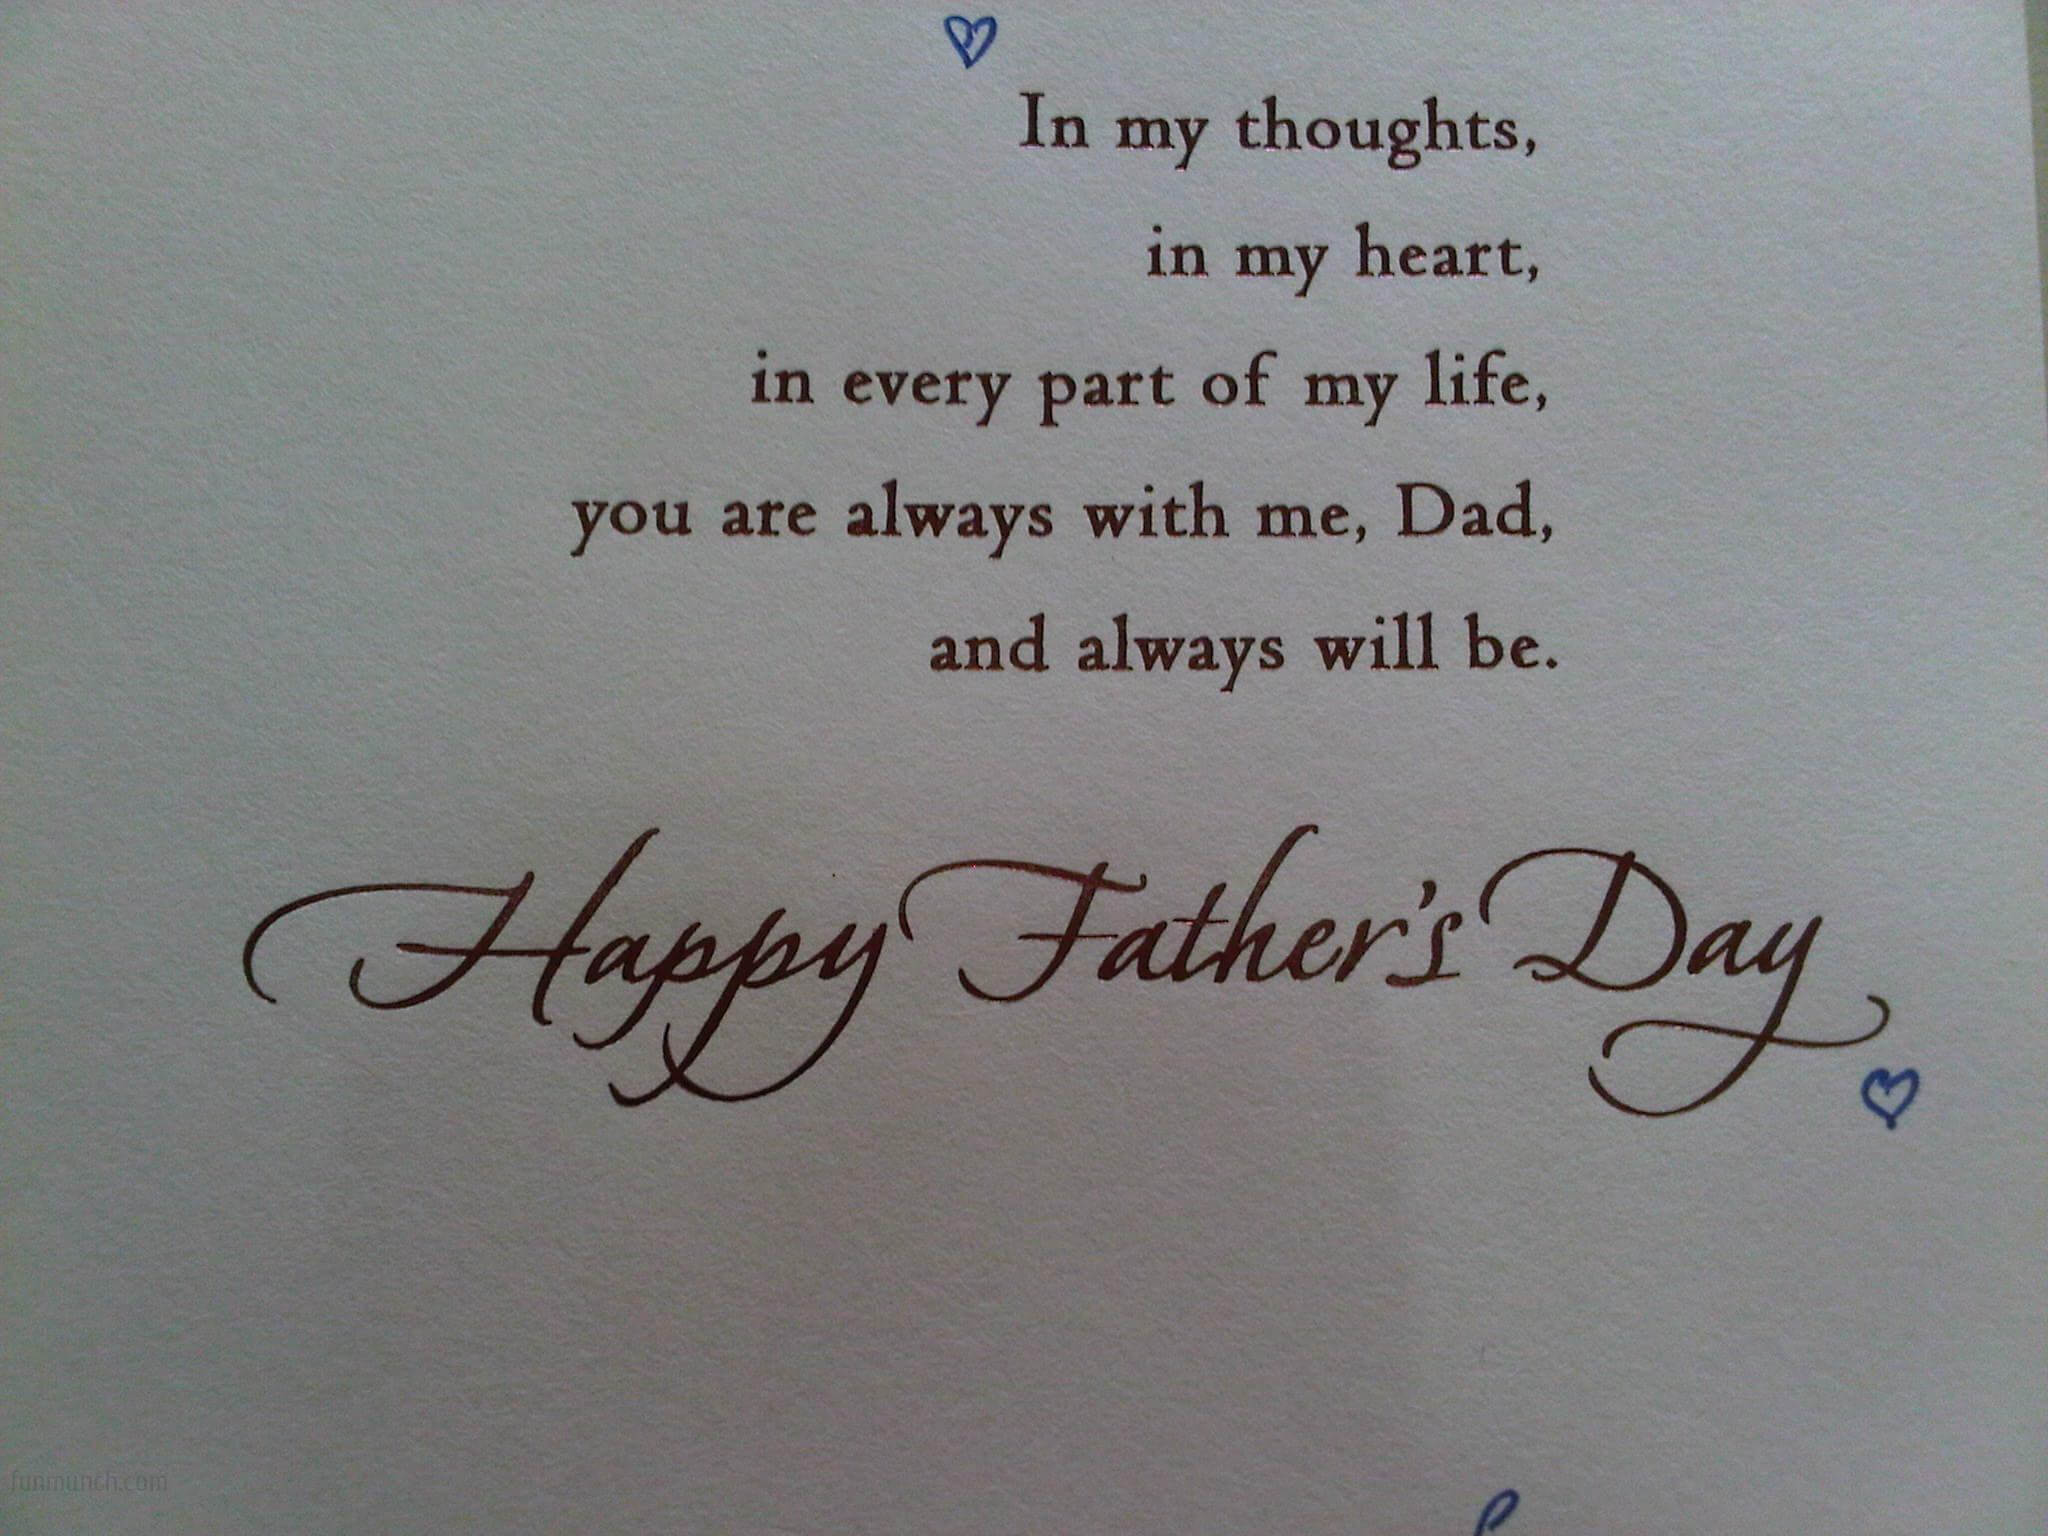 Happy Father's Day 2020 Quotes, Fathers Day Quotes & SMS From Son